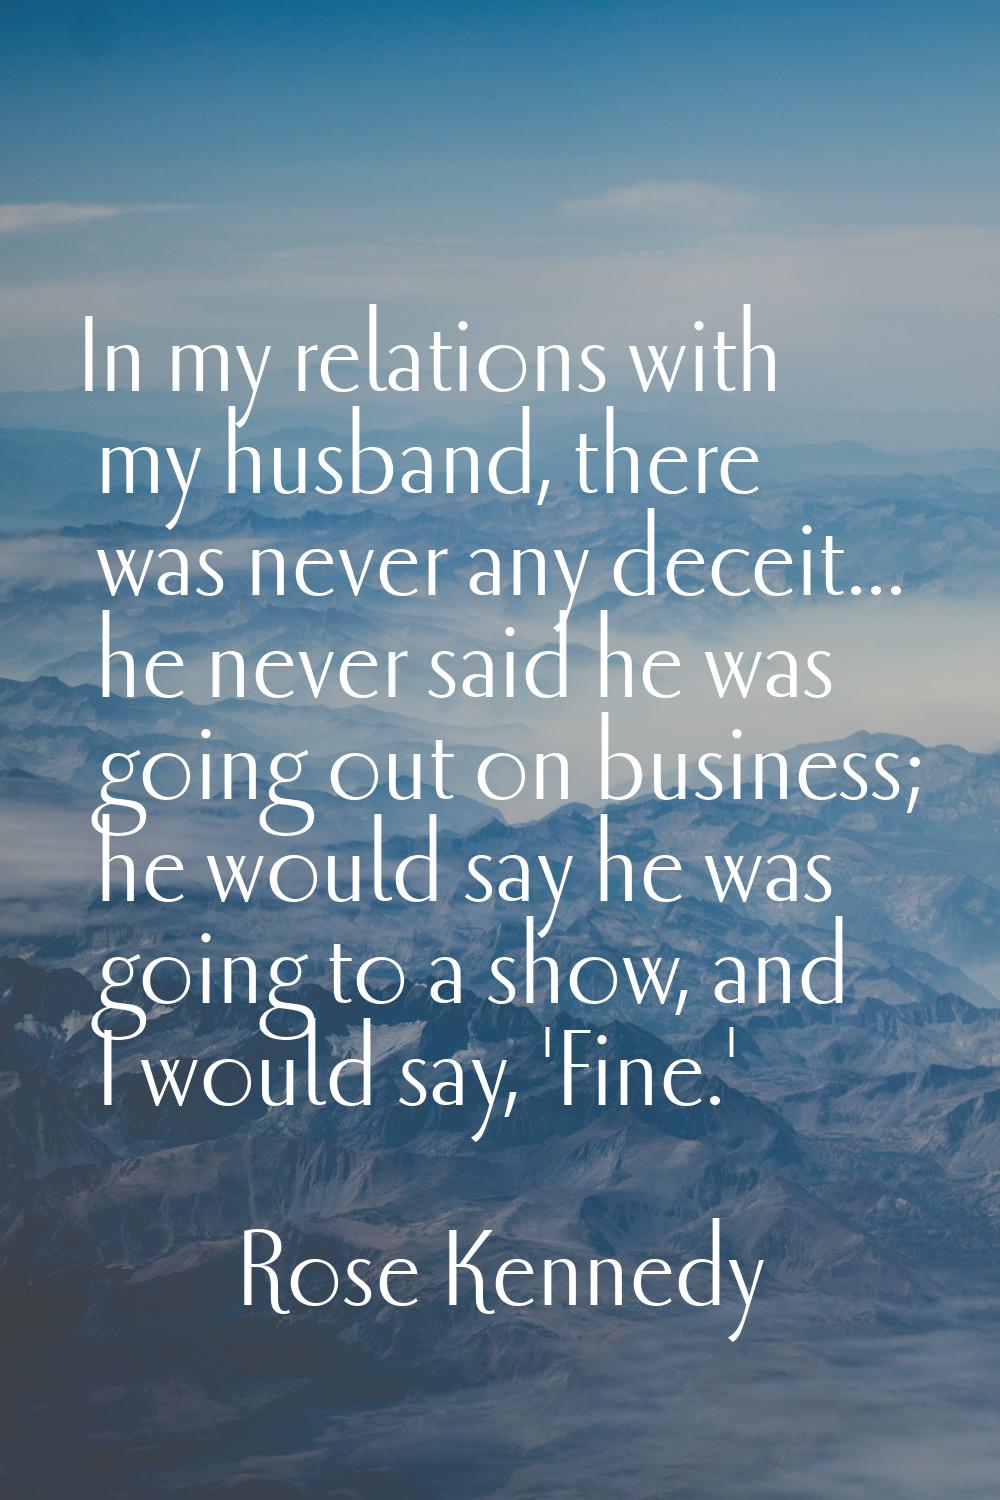 In my relations with my husband, there was never any deceit... he never said he was going out on bu